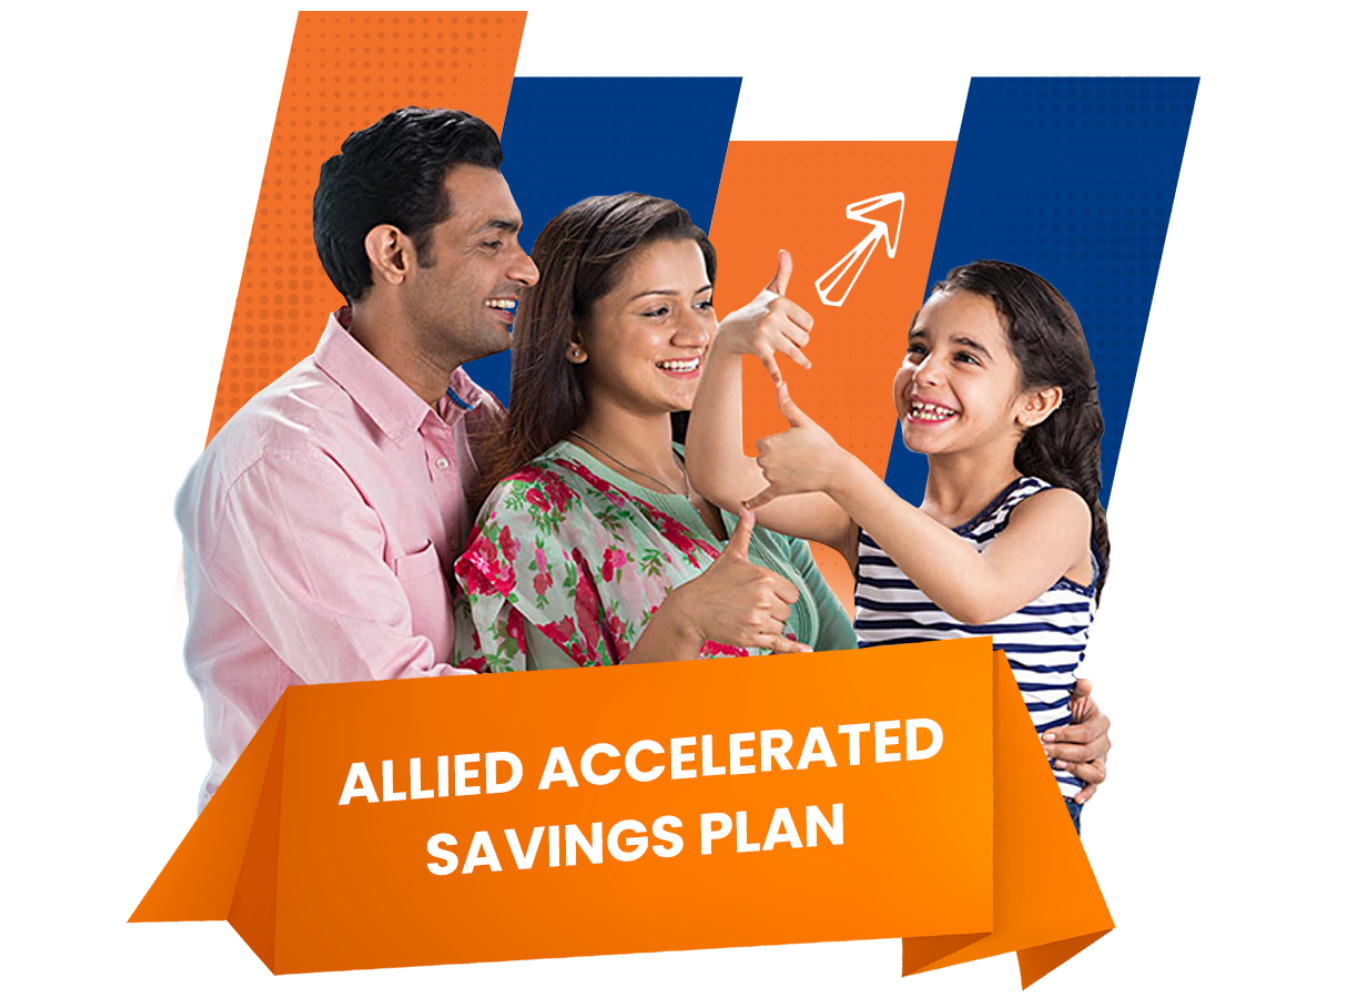 Allied Accelerated Savings Plan